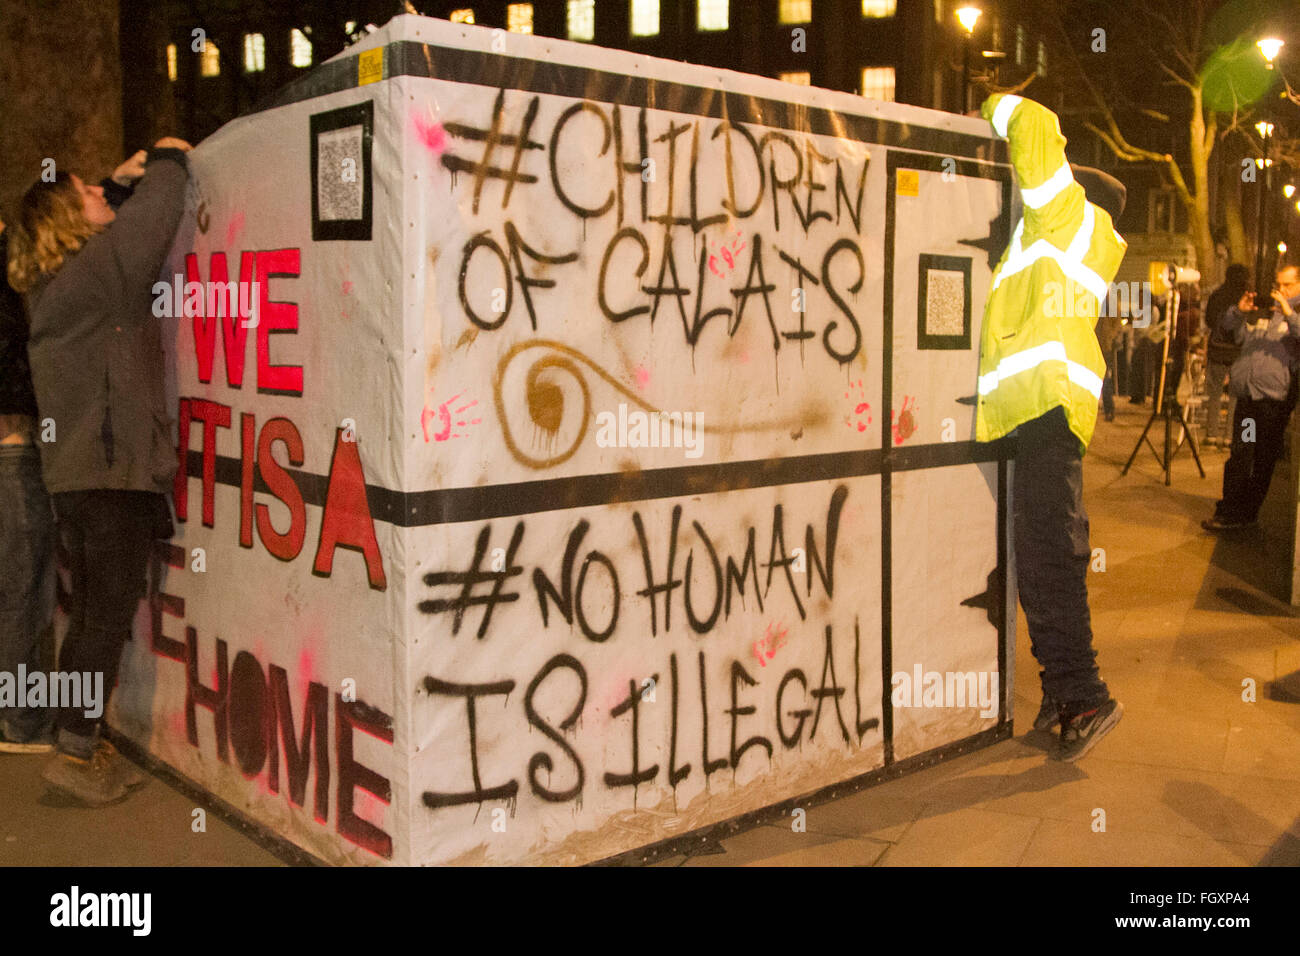 London UK. 22nd February 2016. Protesters rally outside Downing street in London to demand the British government to allow refugees to be allowed to enter Britain and also against the French decision to clear the so called Jungle refugee camp in Calais Credit:  amer ghazzal/Alamy Live News Stock Photo